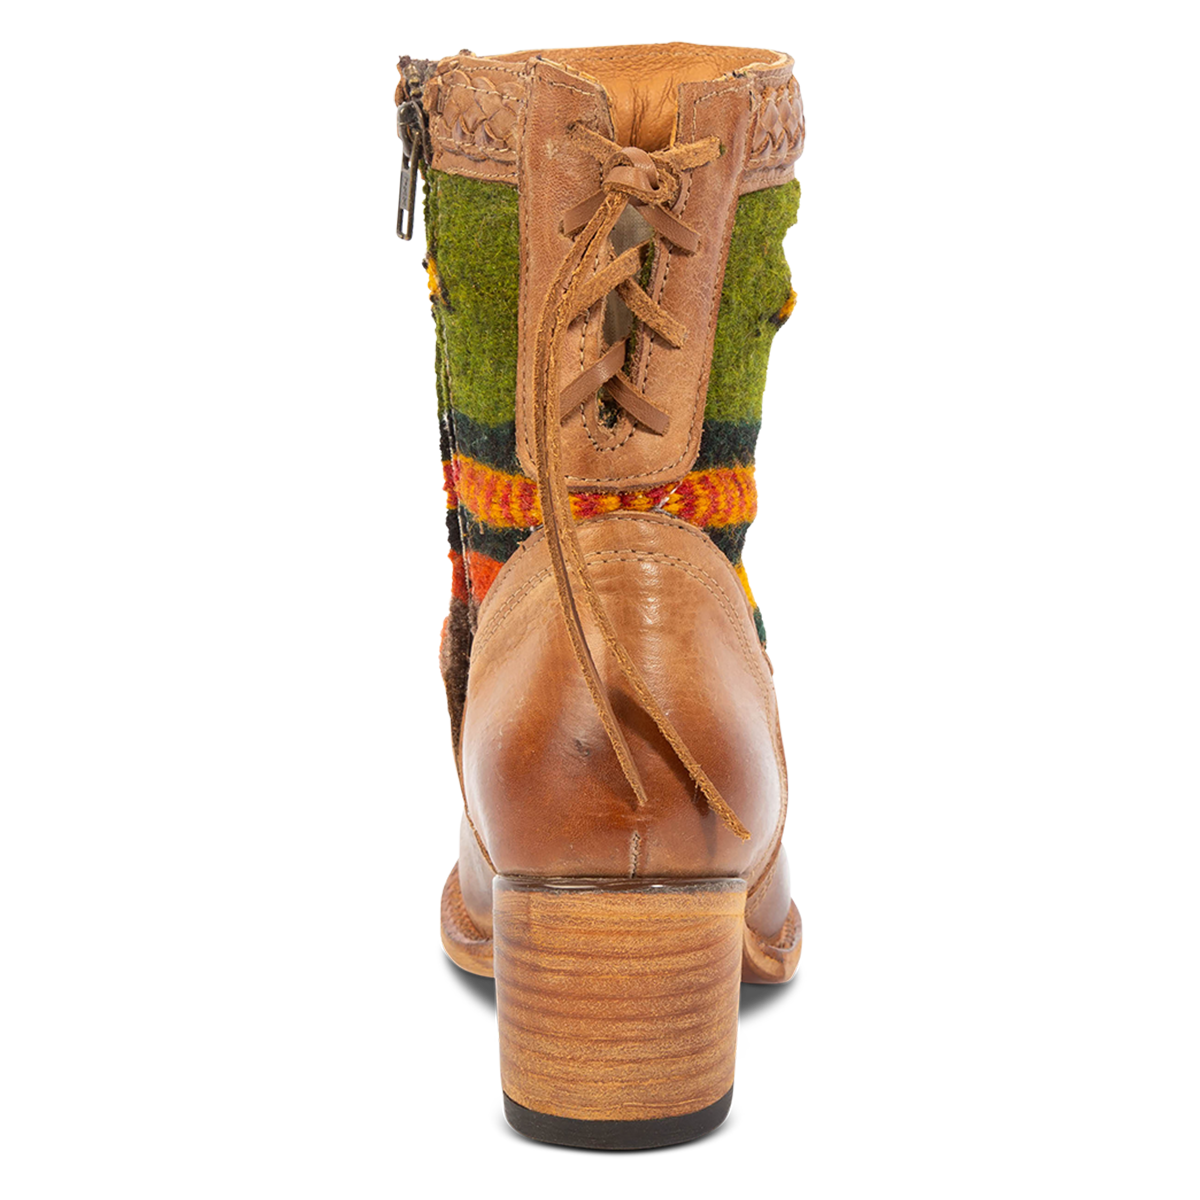 Back view showing adjustable leather lacing, a stacked heel and multi-colored woven detailing on FREEBIRD women's Songbird tan leather bootie